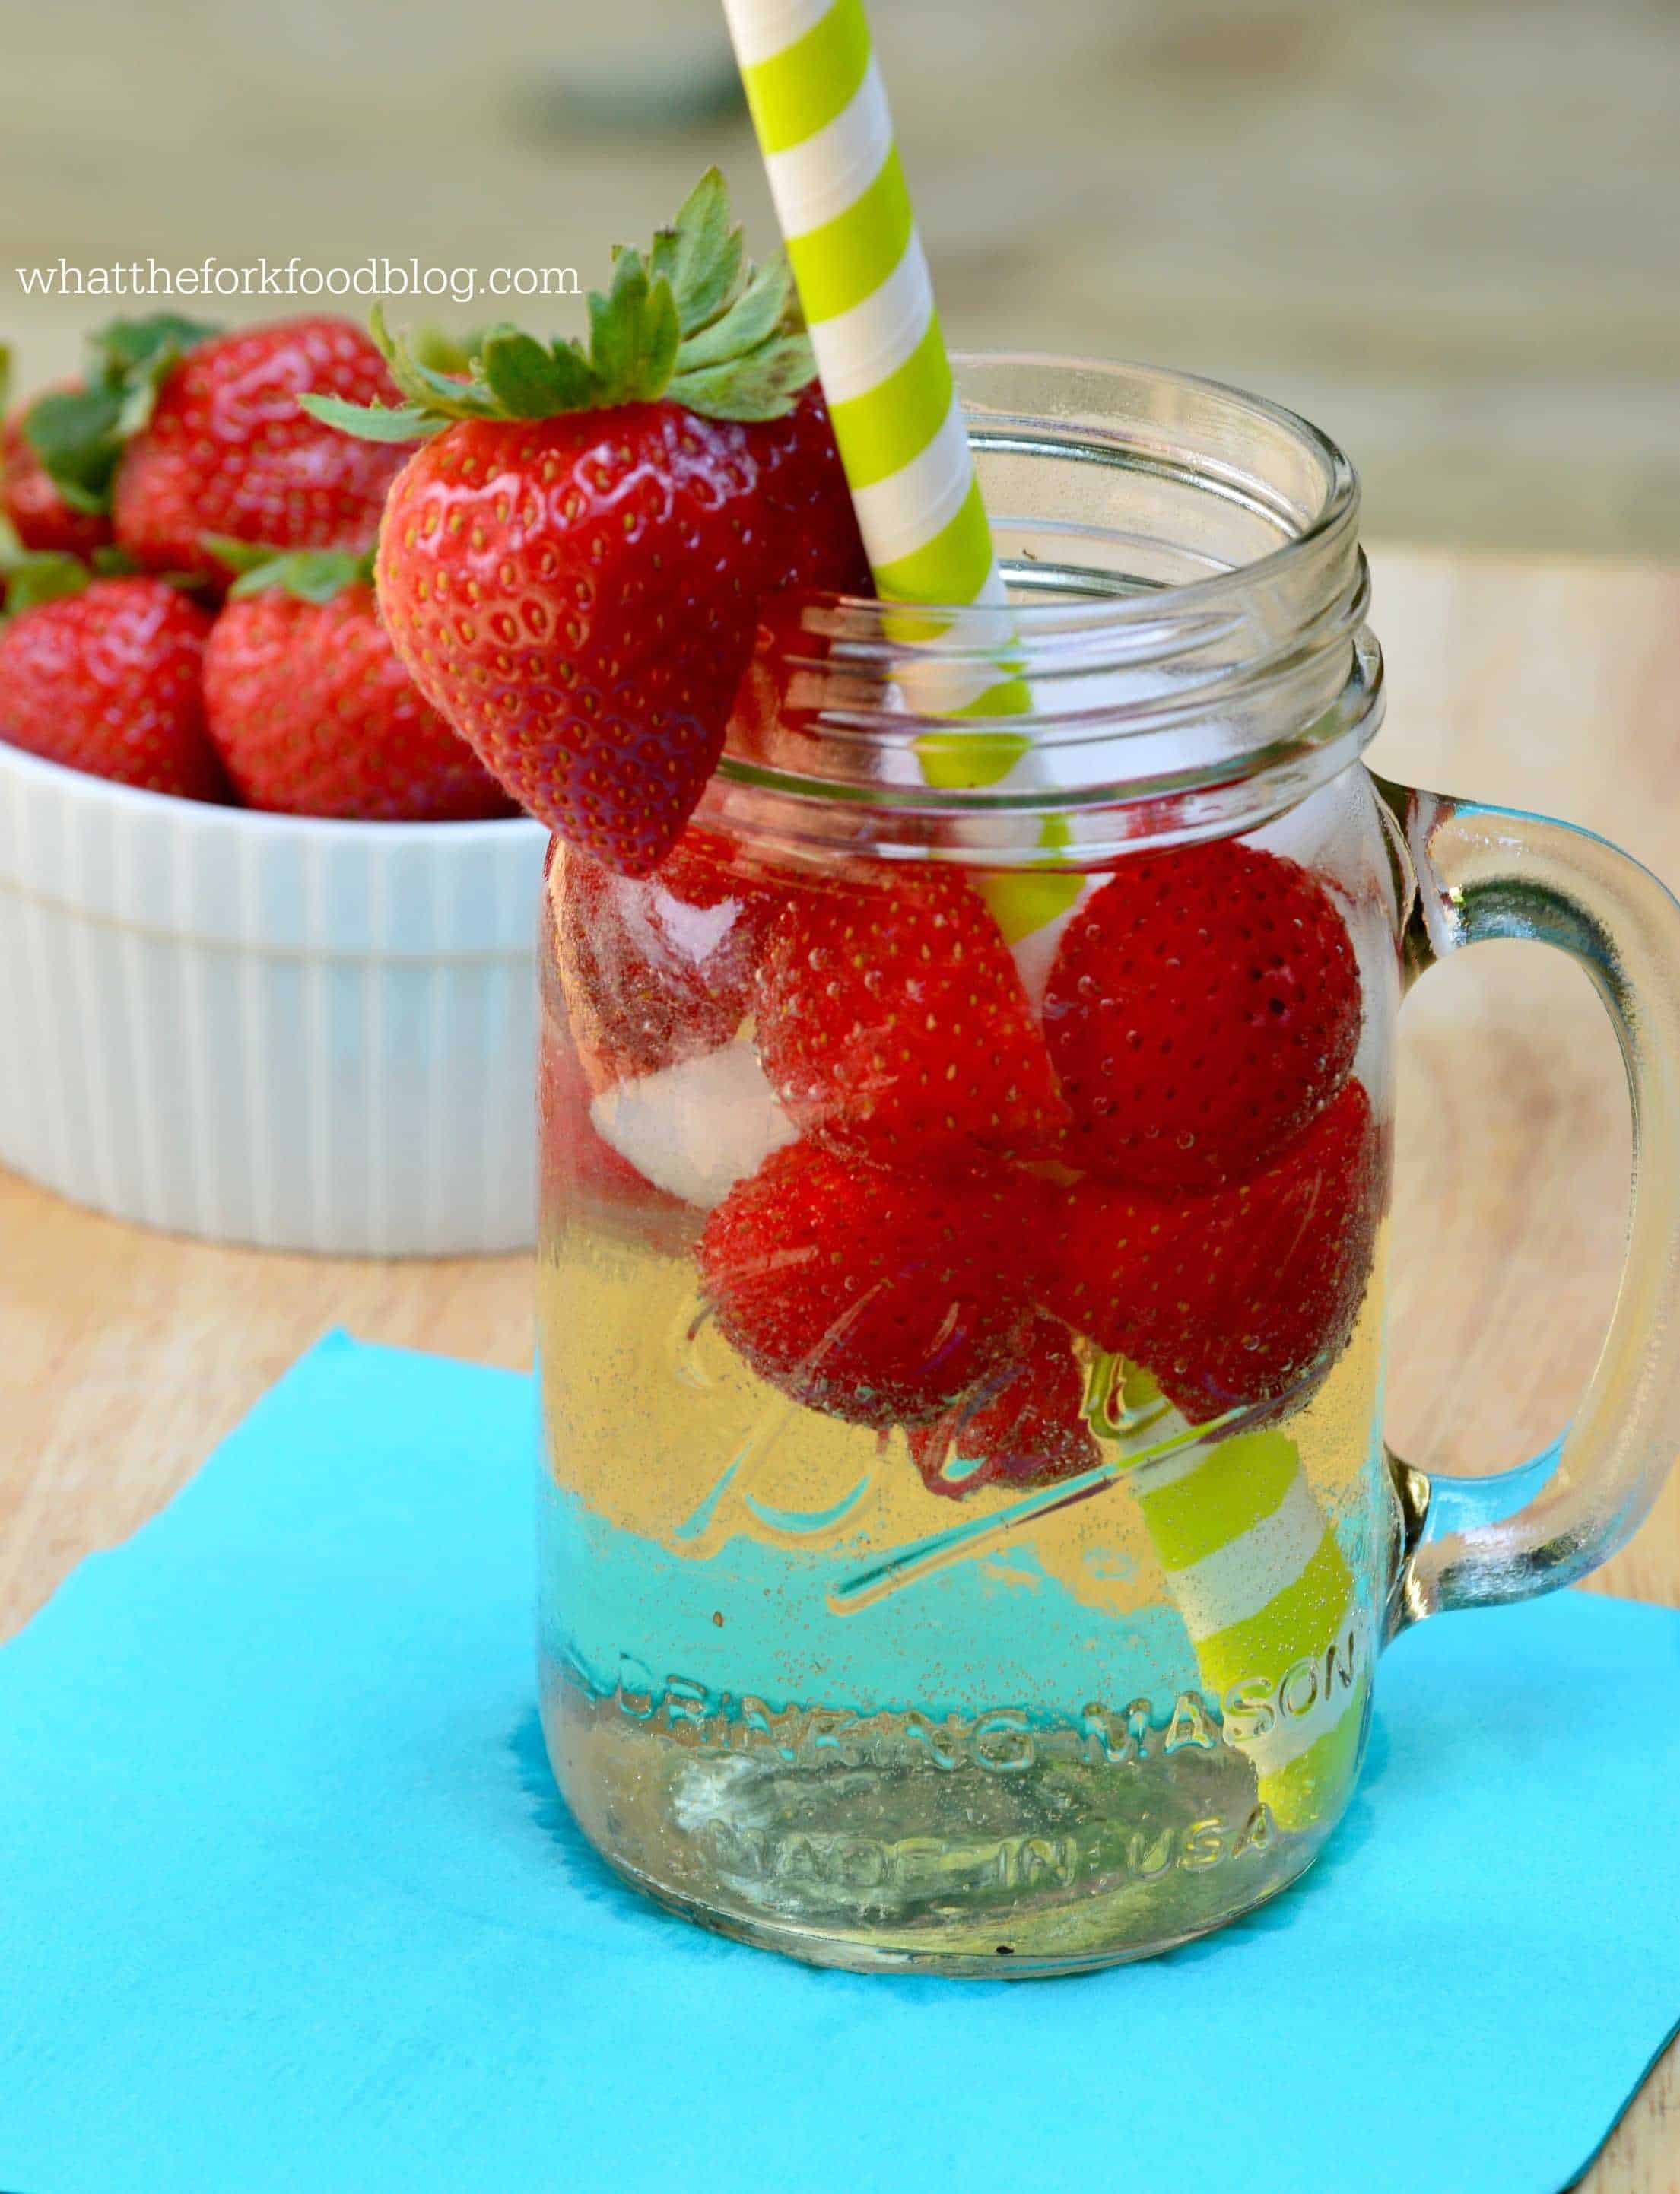 Strawberrry Moscato Spritzer from What The Fork Food Blog